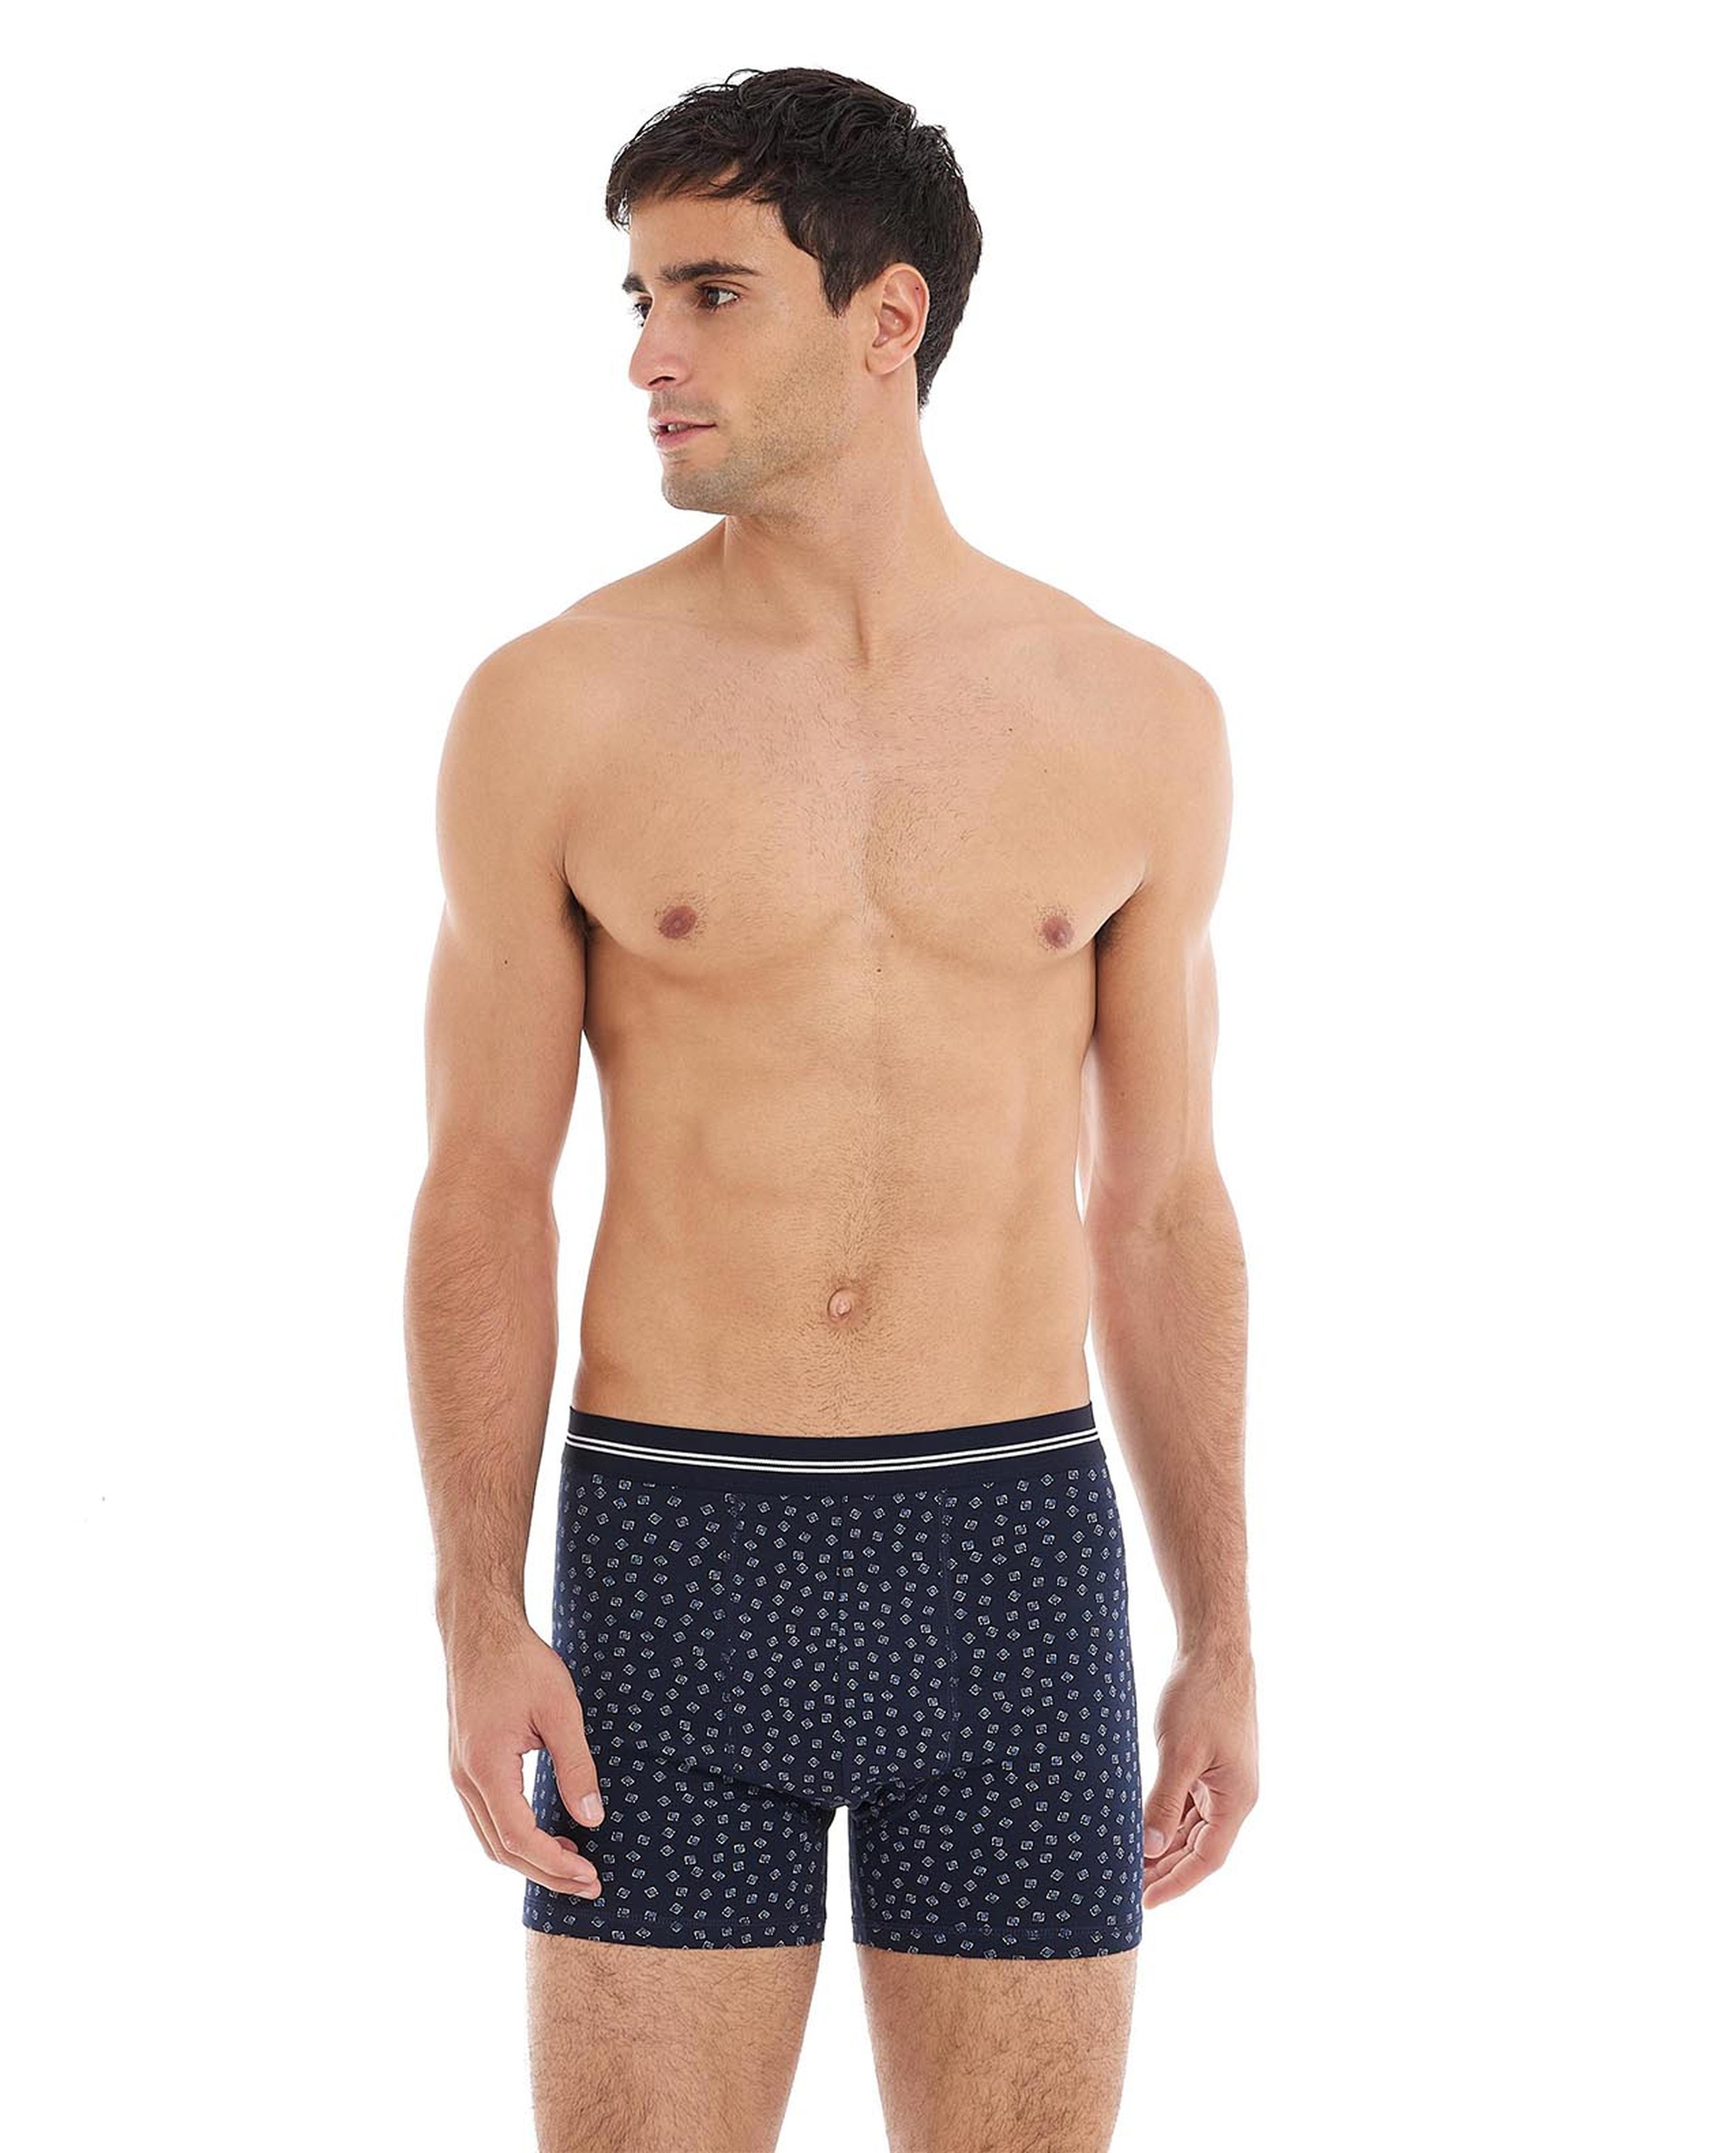 Printed Trunks with Elastic Waistband